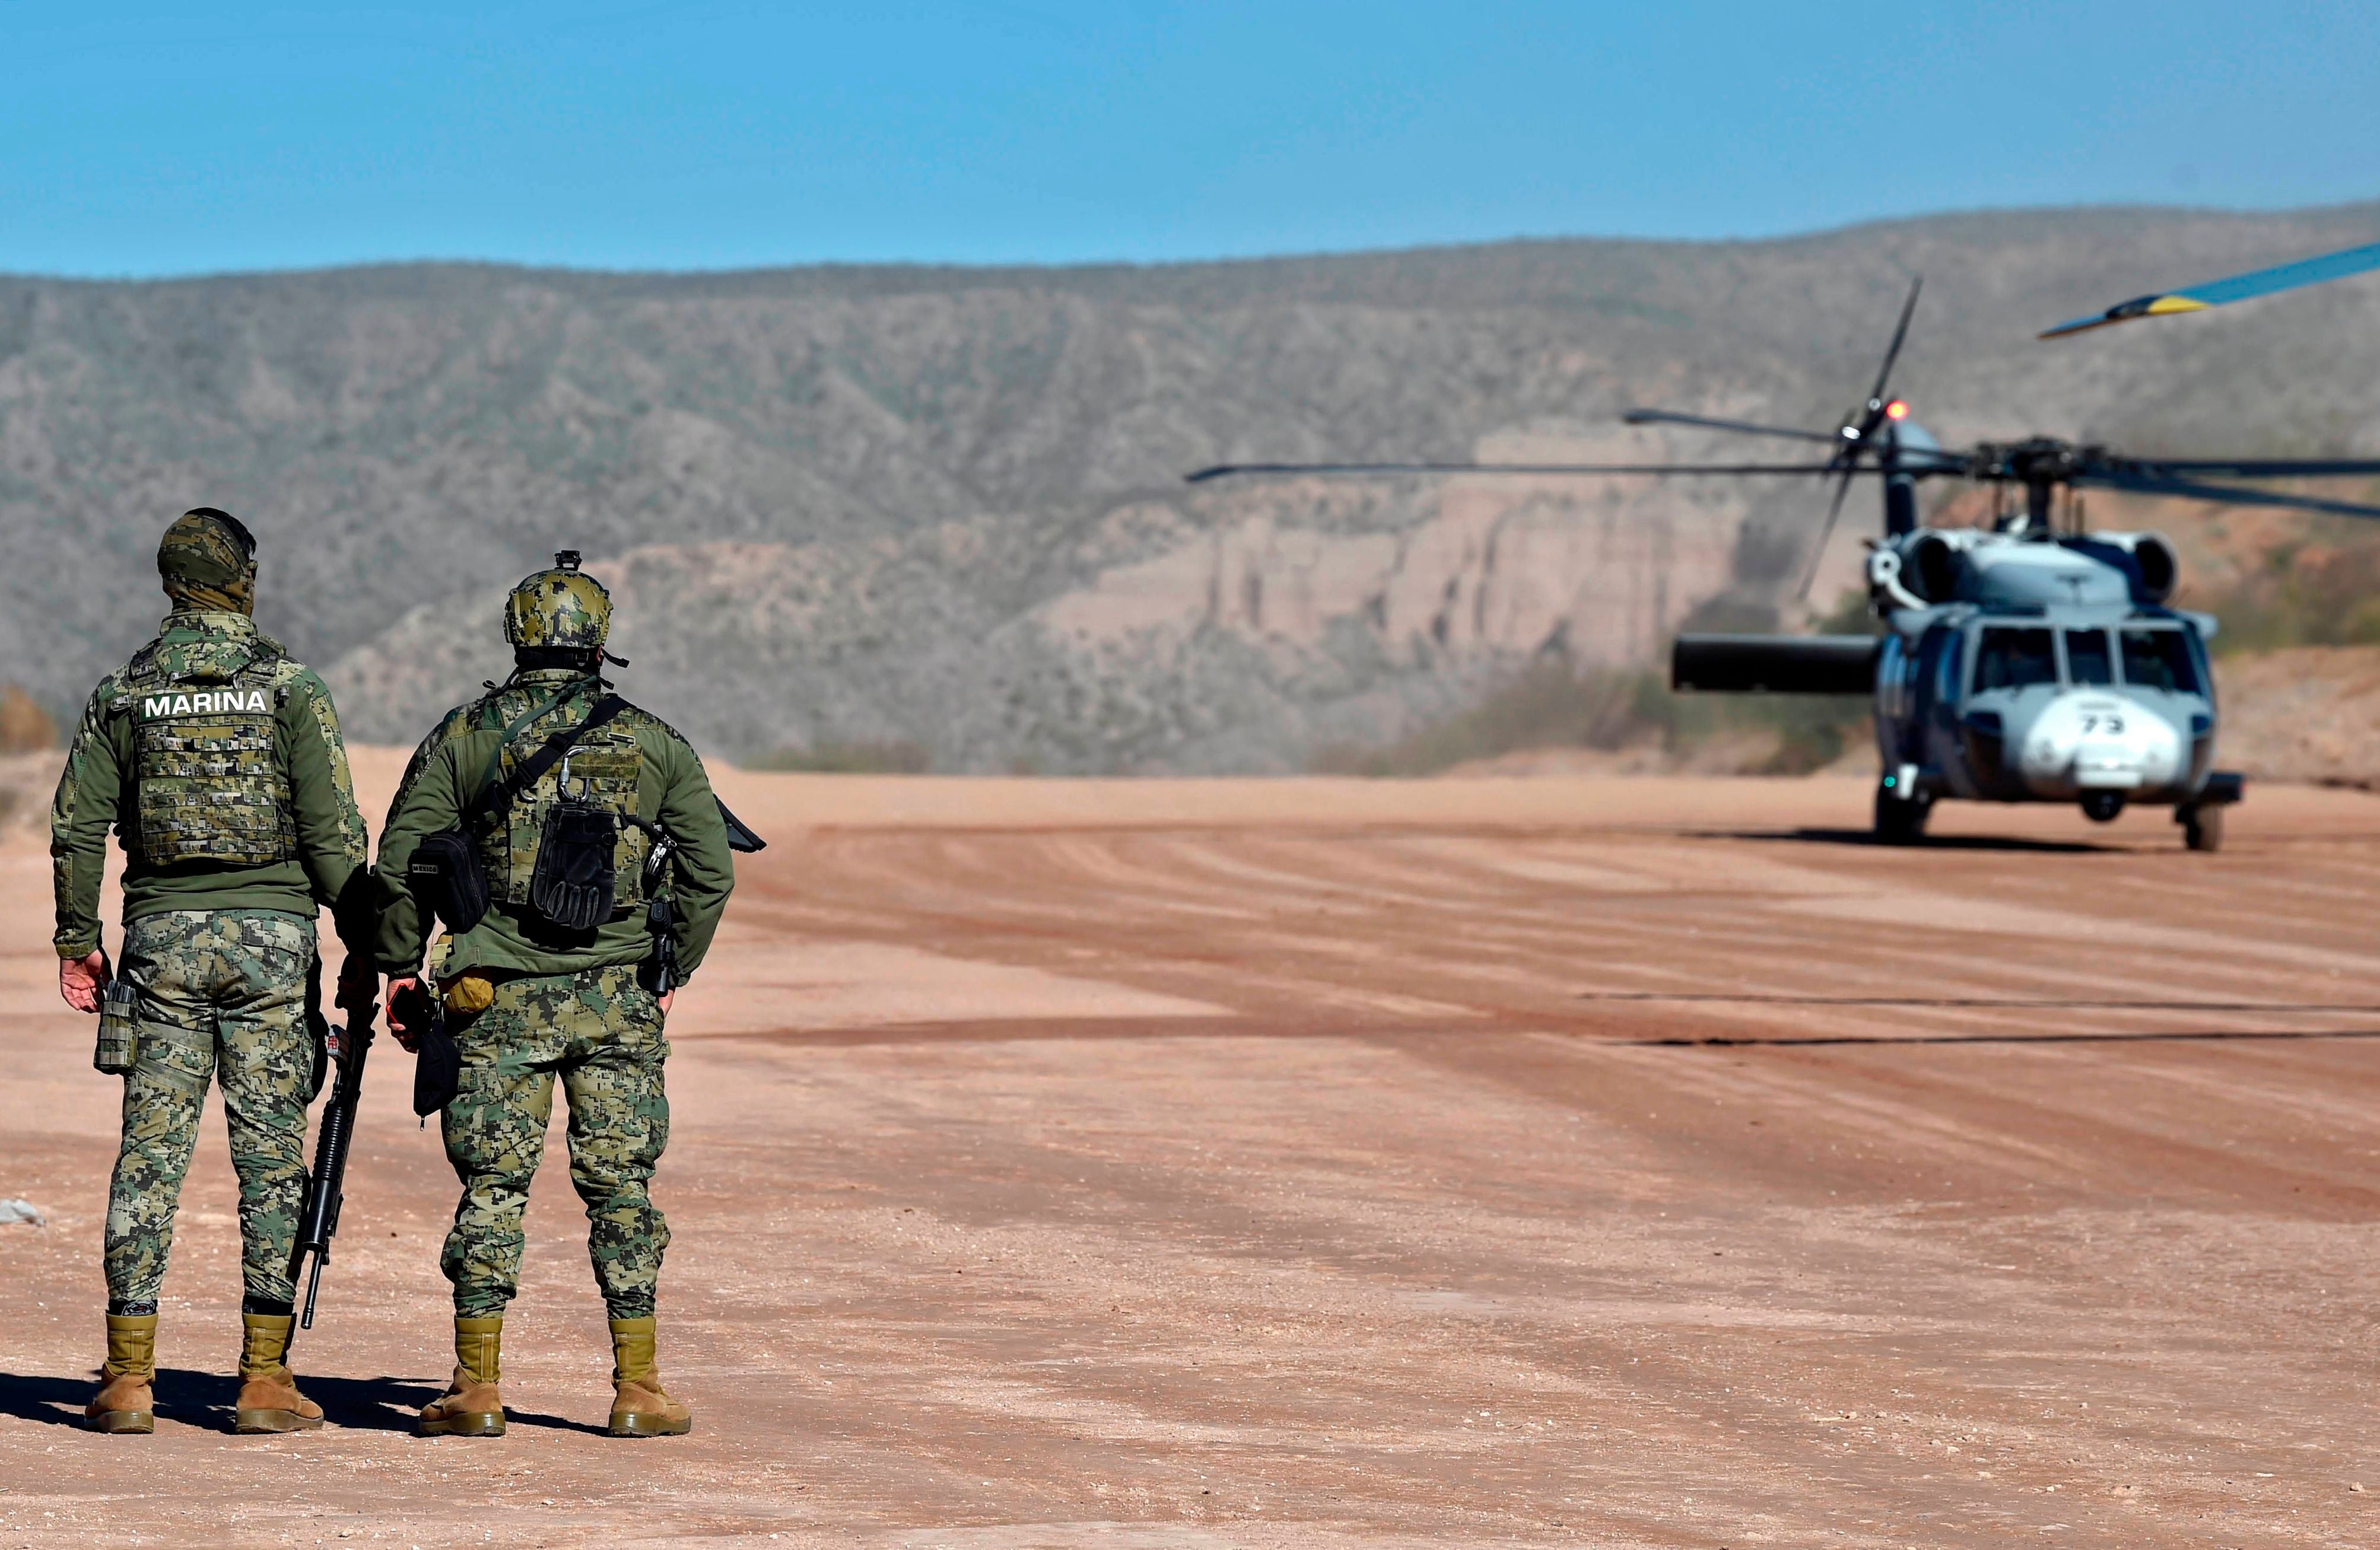 Members of the Mexican Navy are seen upon the landing of an Air Force helicopter at La Mora ranch, in Bavispe, Sonora state, Mexico, on January 11, 2020.